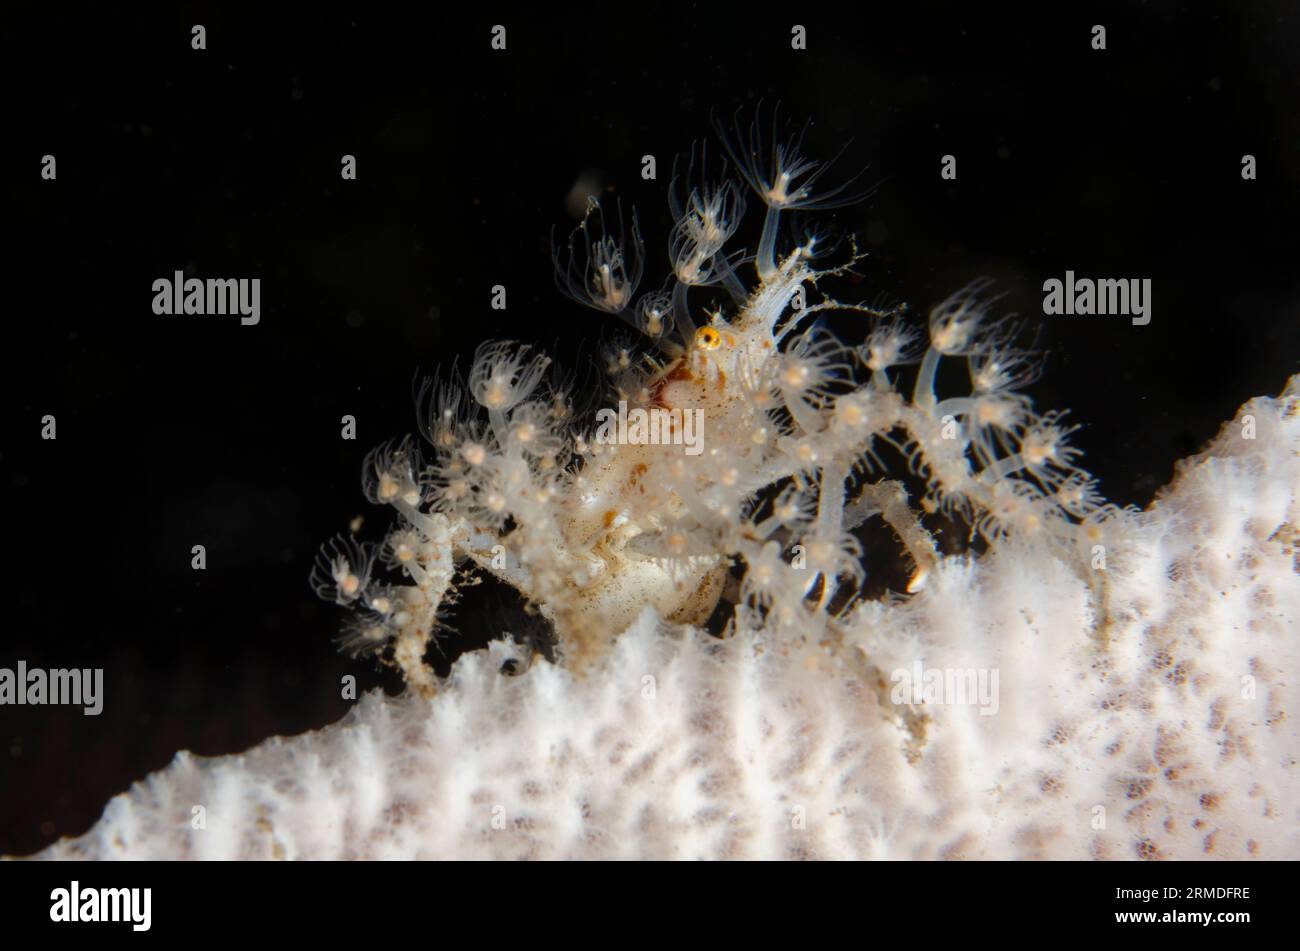 Spider Crab, Achaeus spinosus, carrying small Anemones for protection and camouflage on Sponge, Porifera Phylum, night dive, Scuba Seraya House Reef d Stock Photo